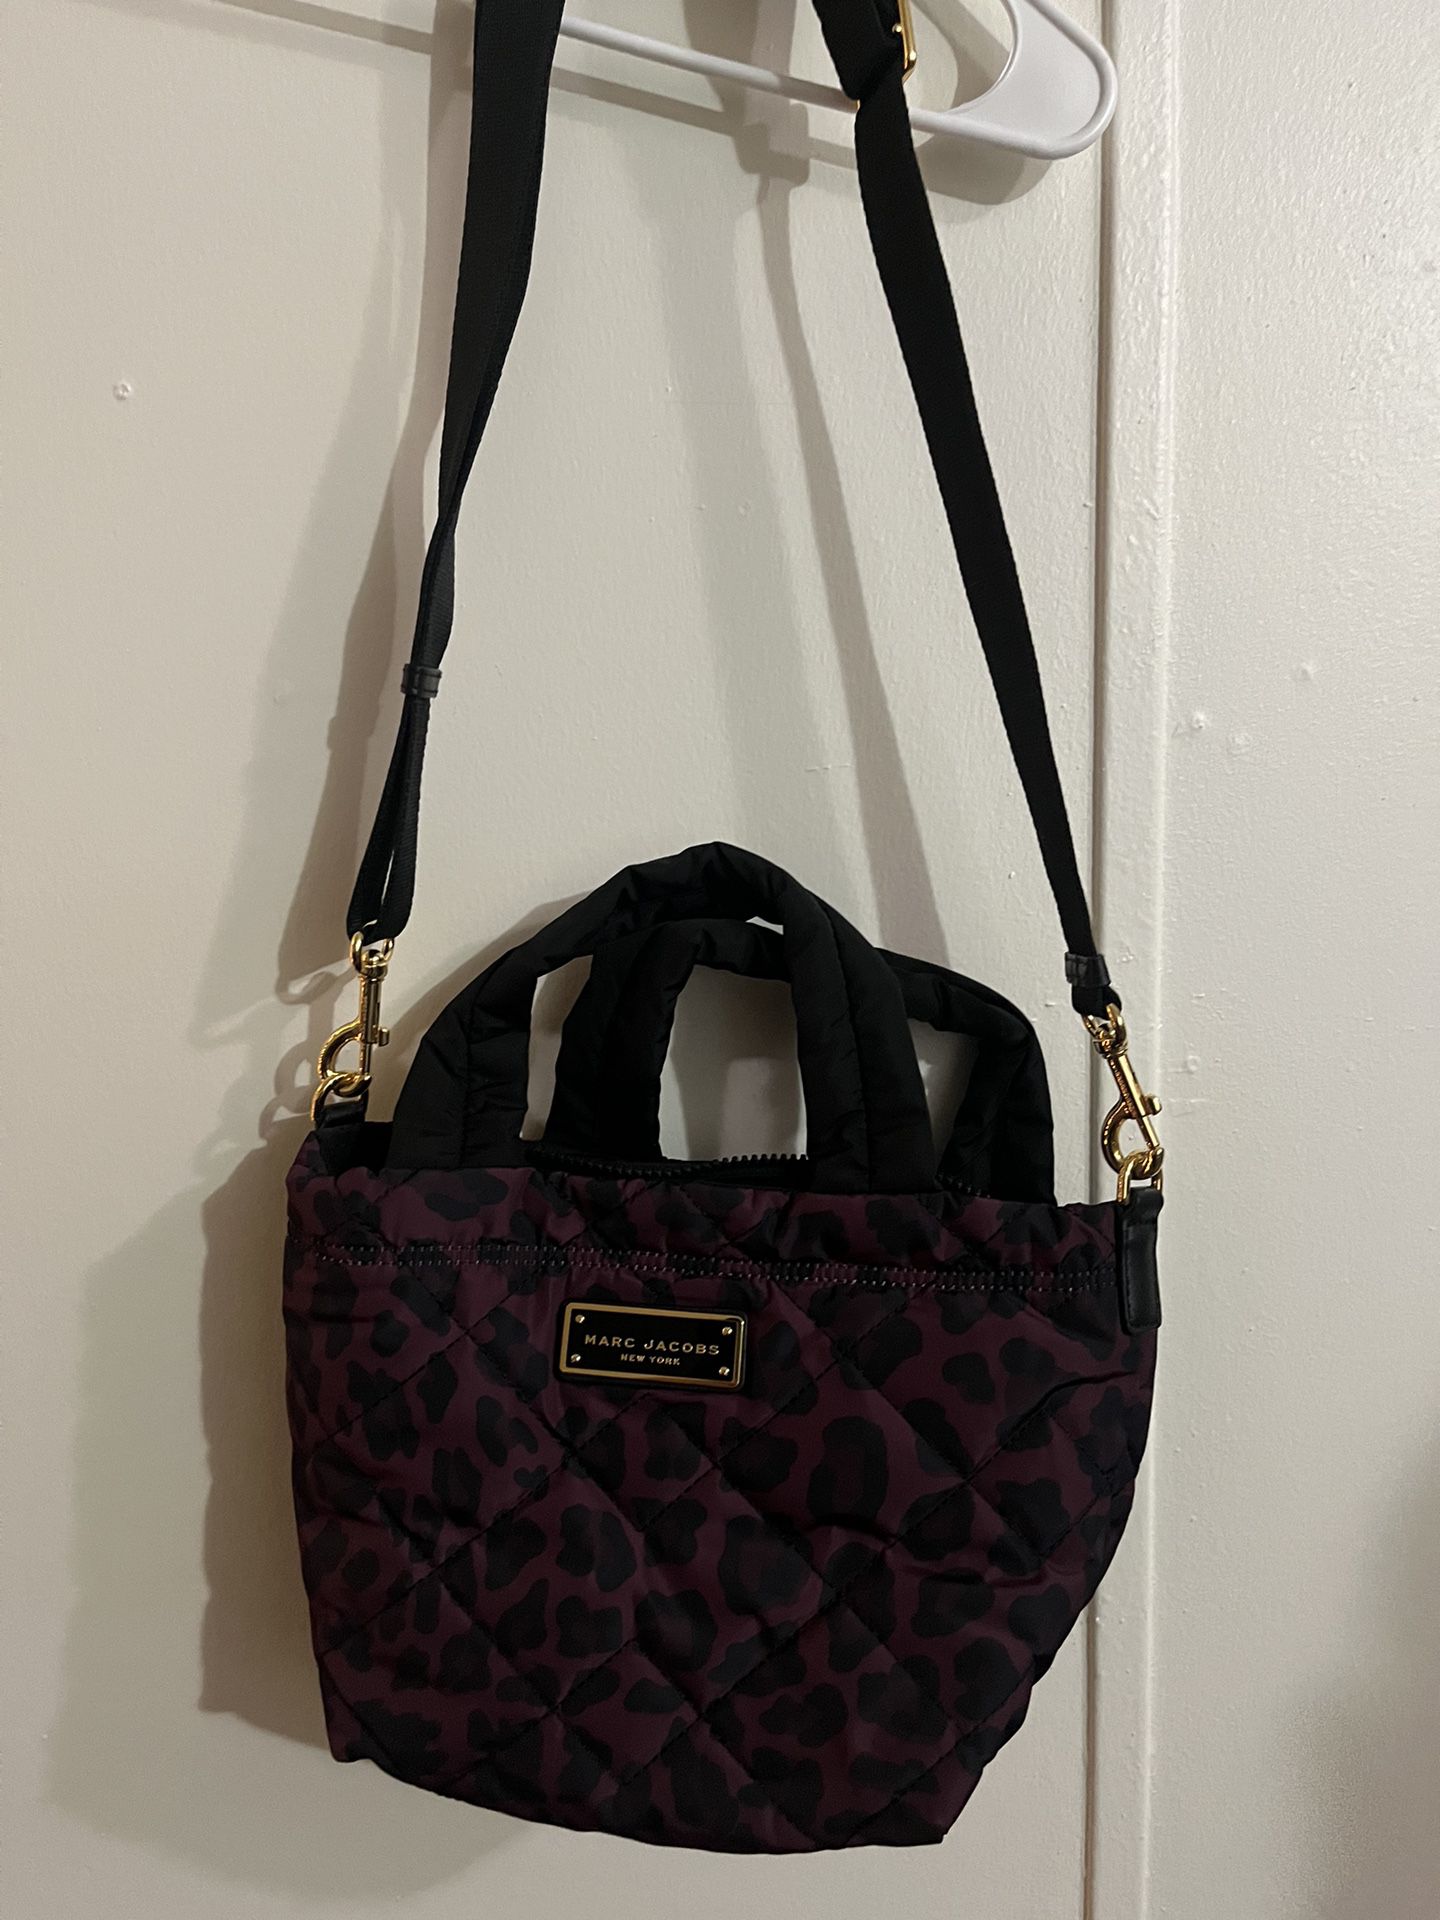 marc jacobs tote 